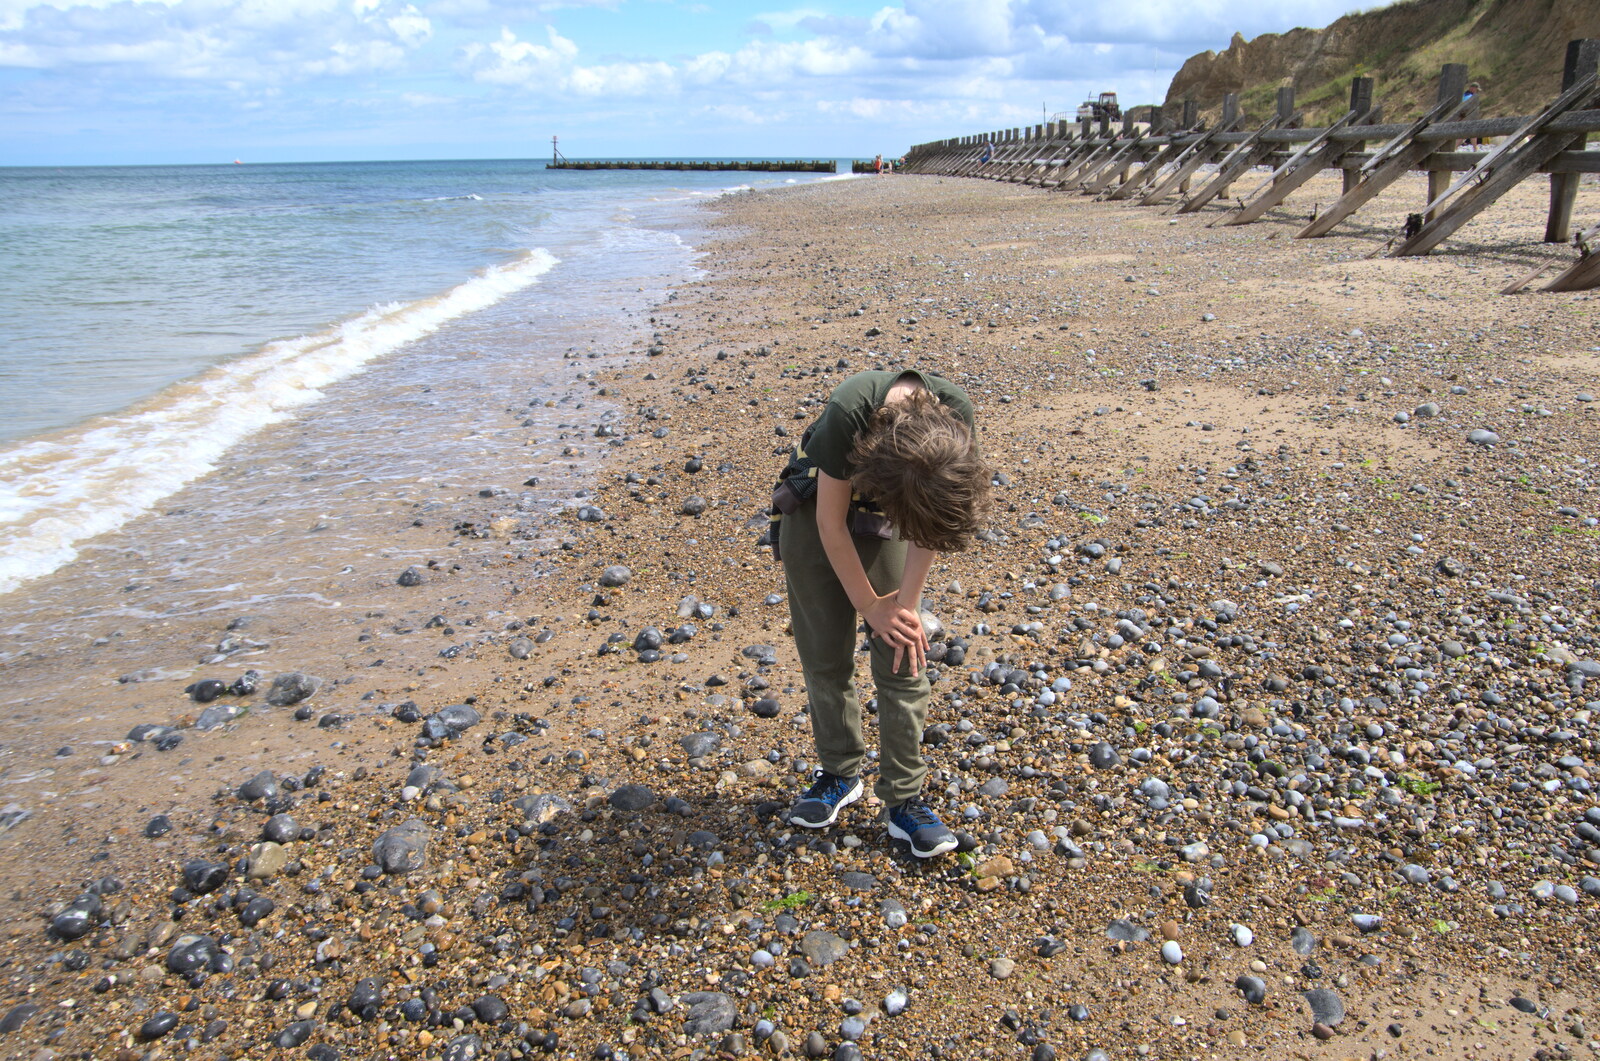 Fred scopes for Belemnites from Camping on the Coast, East Runton, North Norfolk - 25th July 2020